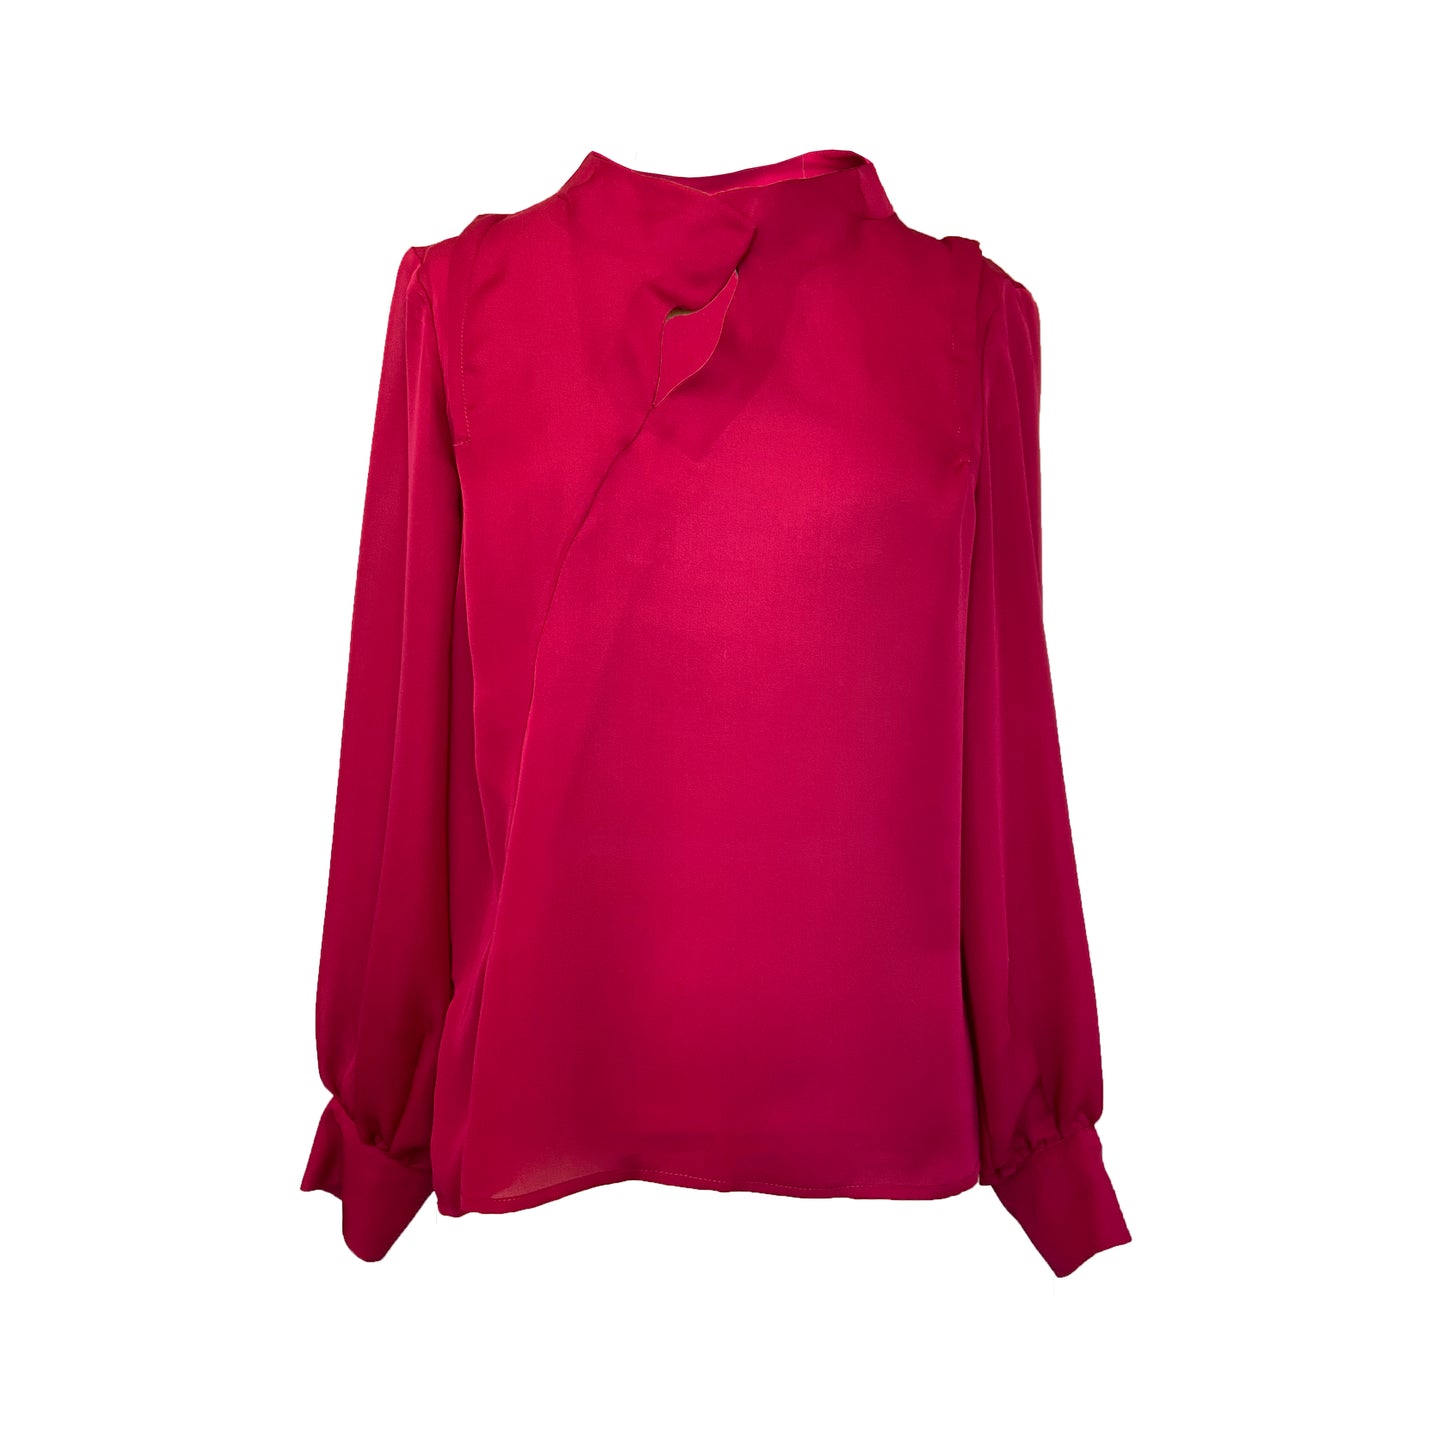 Silk blouse in cherry red